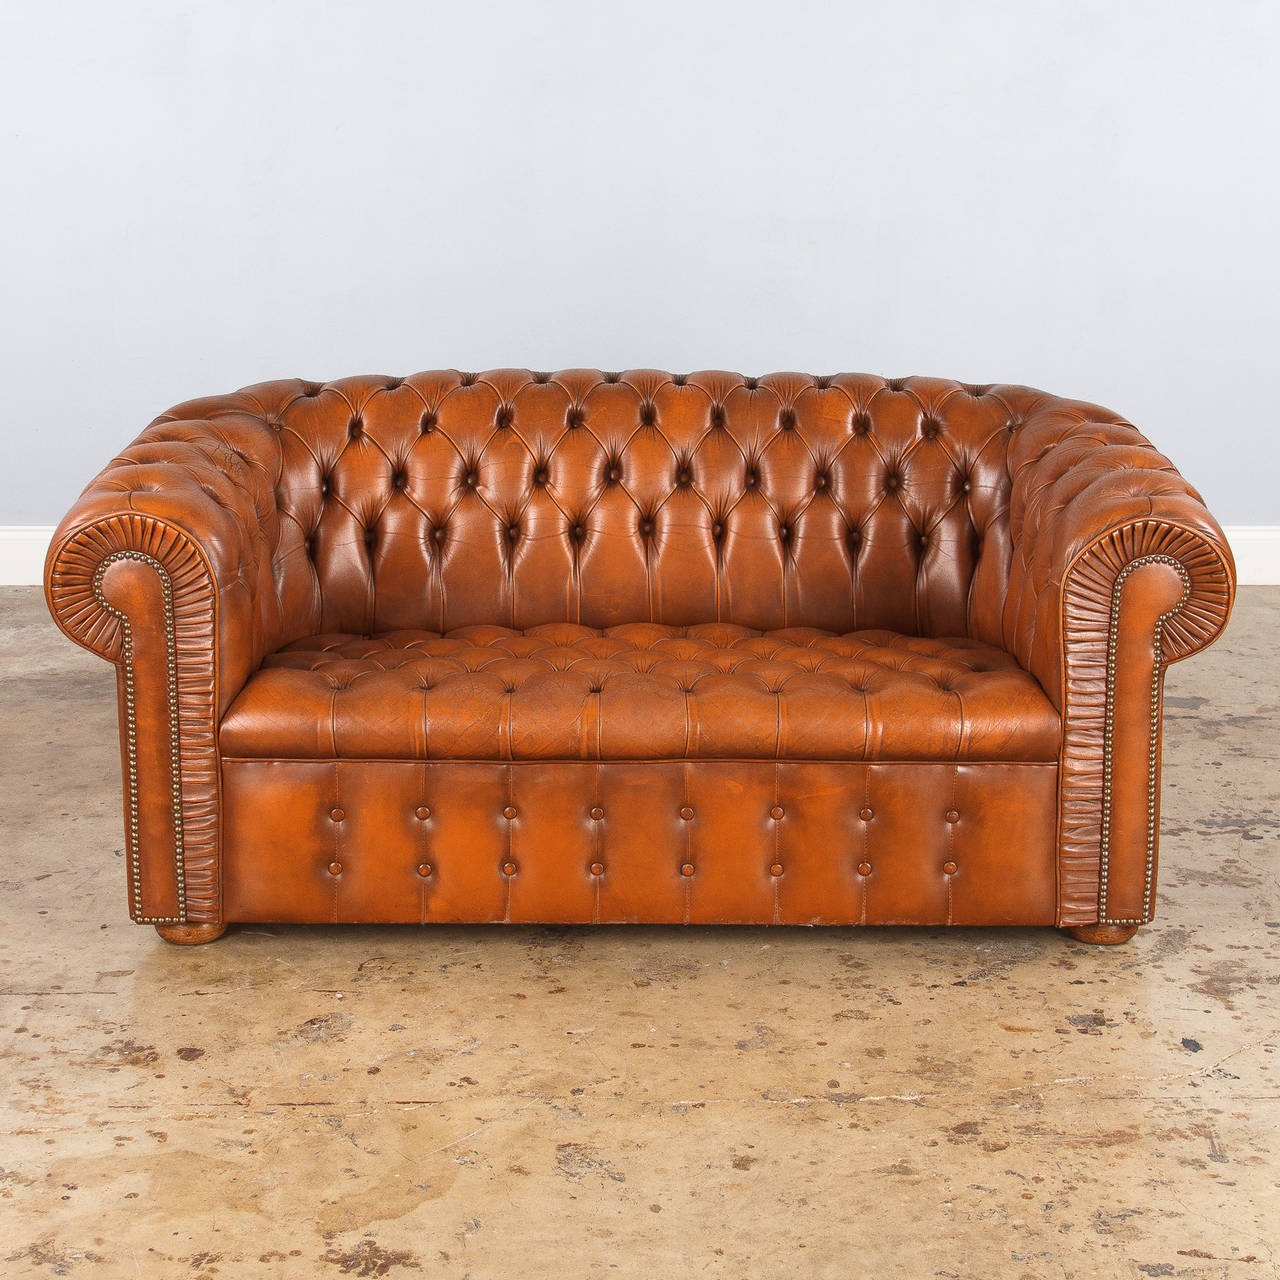 Great Britain (UK) Leather Chesterfield Loveseat Sofa, circa 1940s